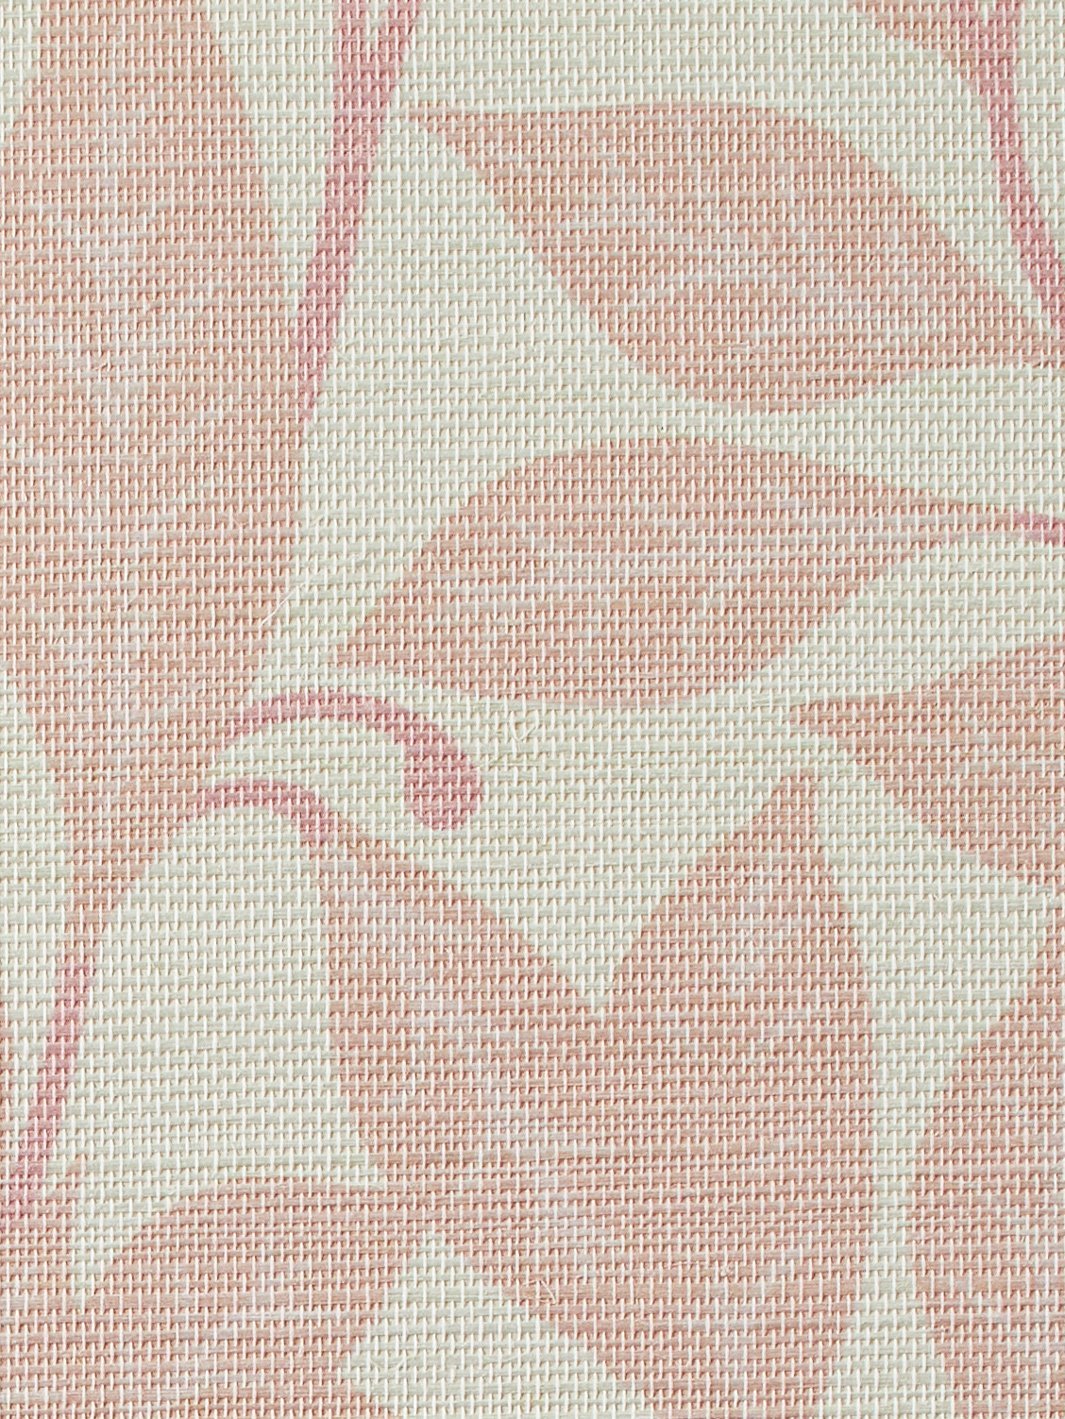 'Orchard Leaves' Grasscloth' Wallpaper by Wallshoppe - Pink